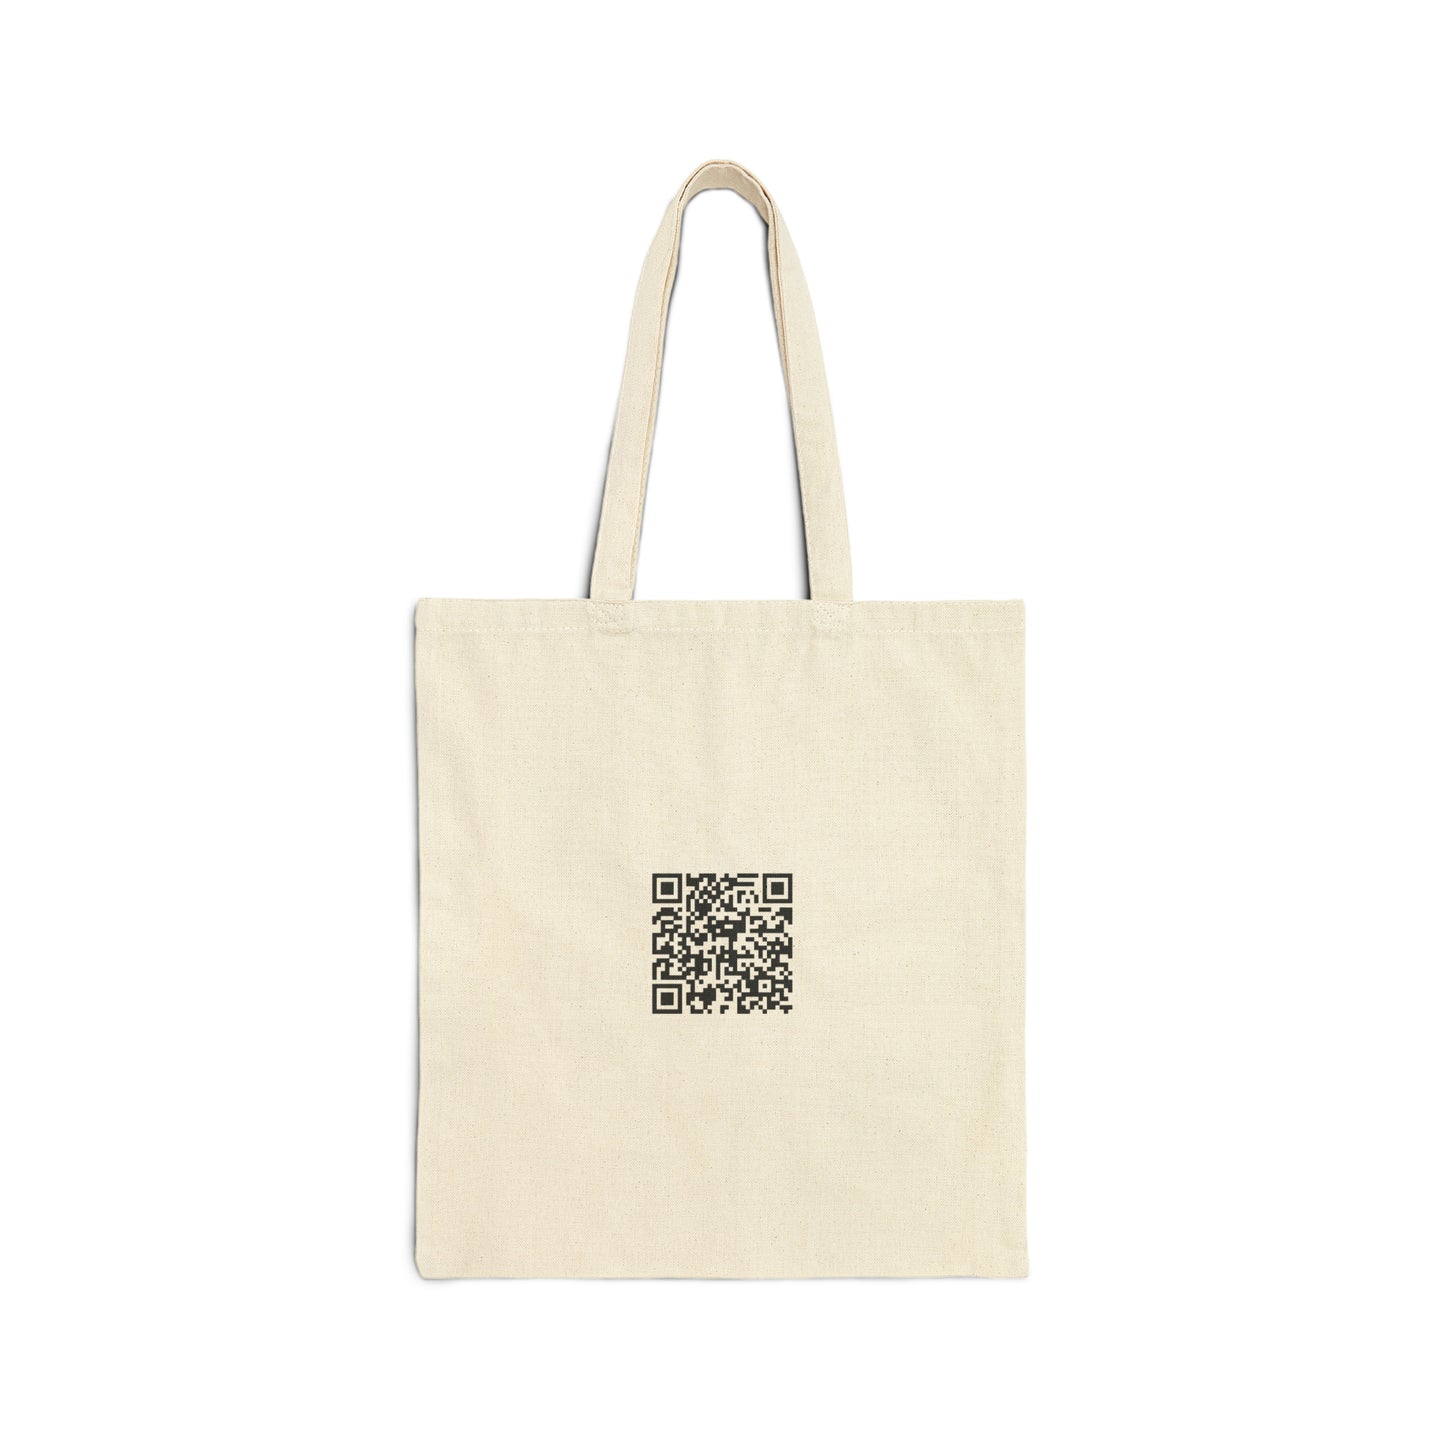 Beautiful & Battered - Cotton Canvas Tote Bag